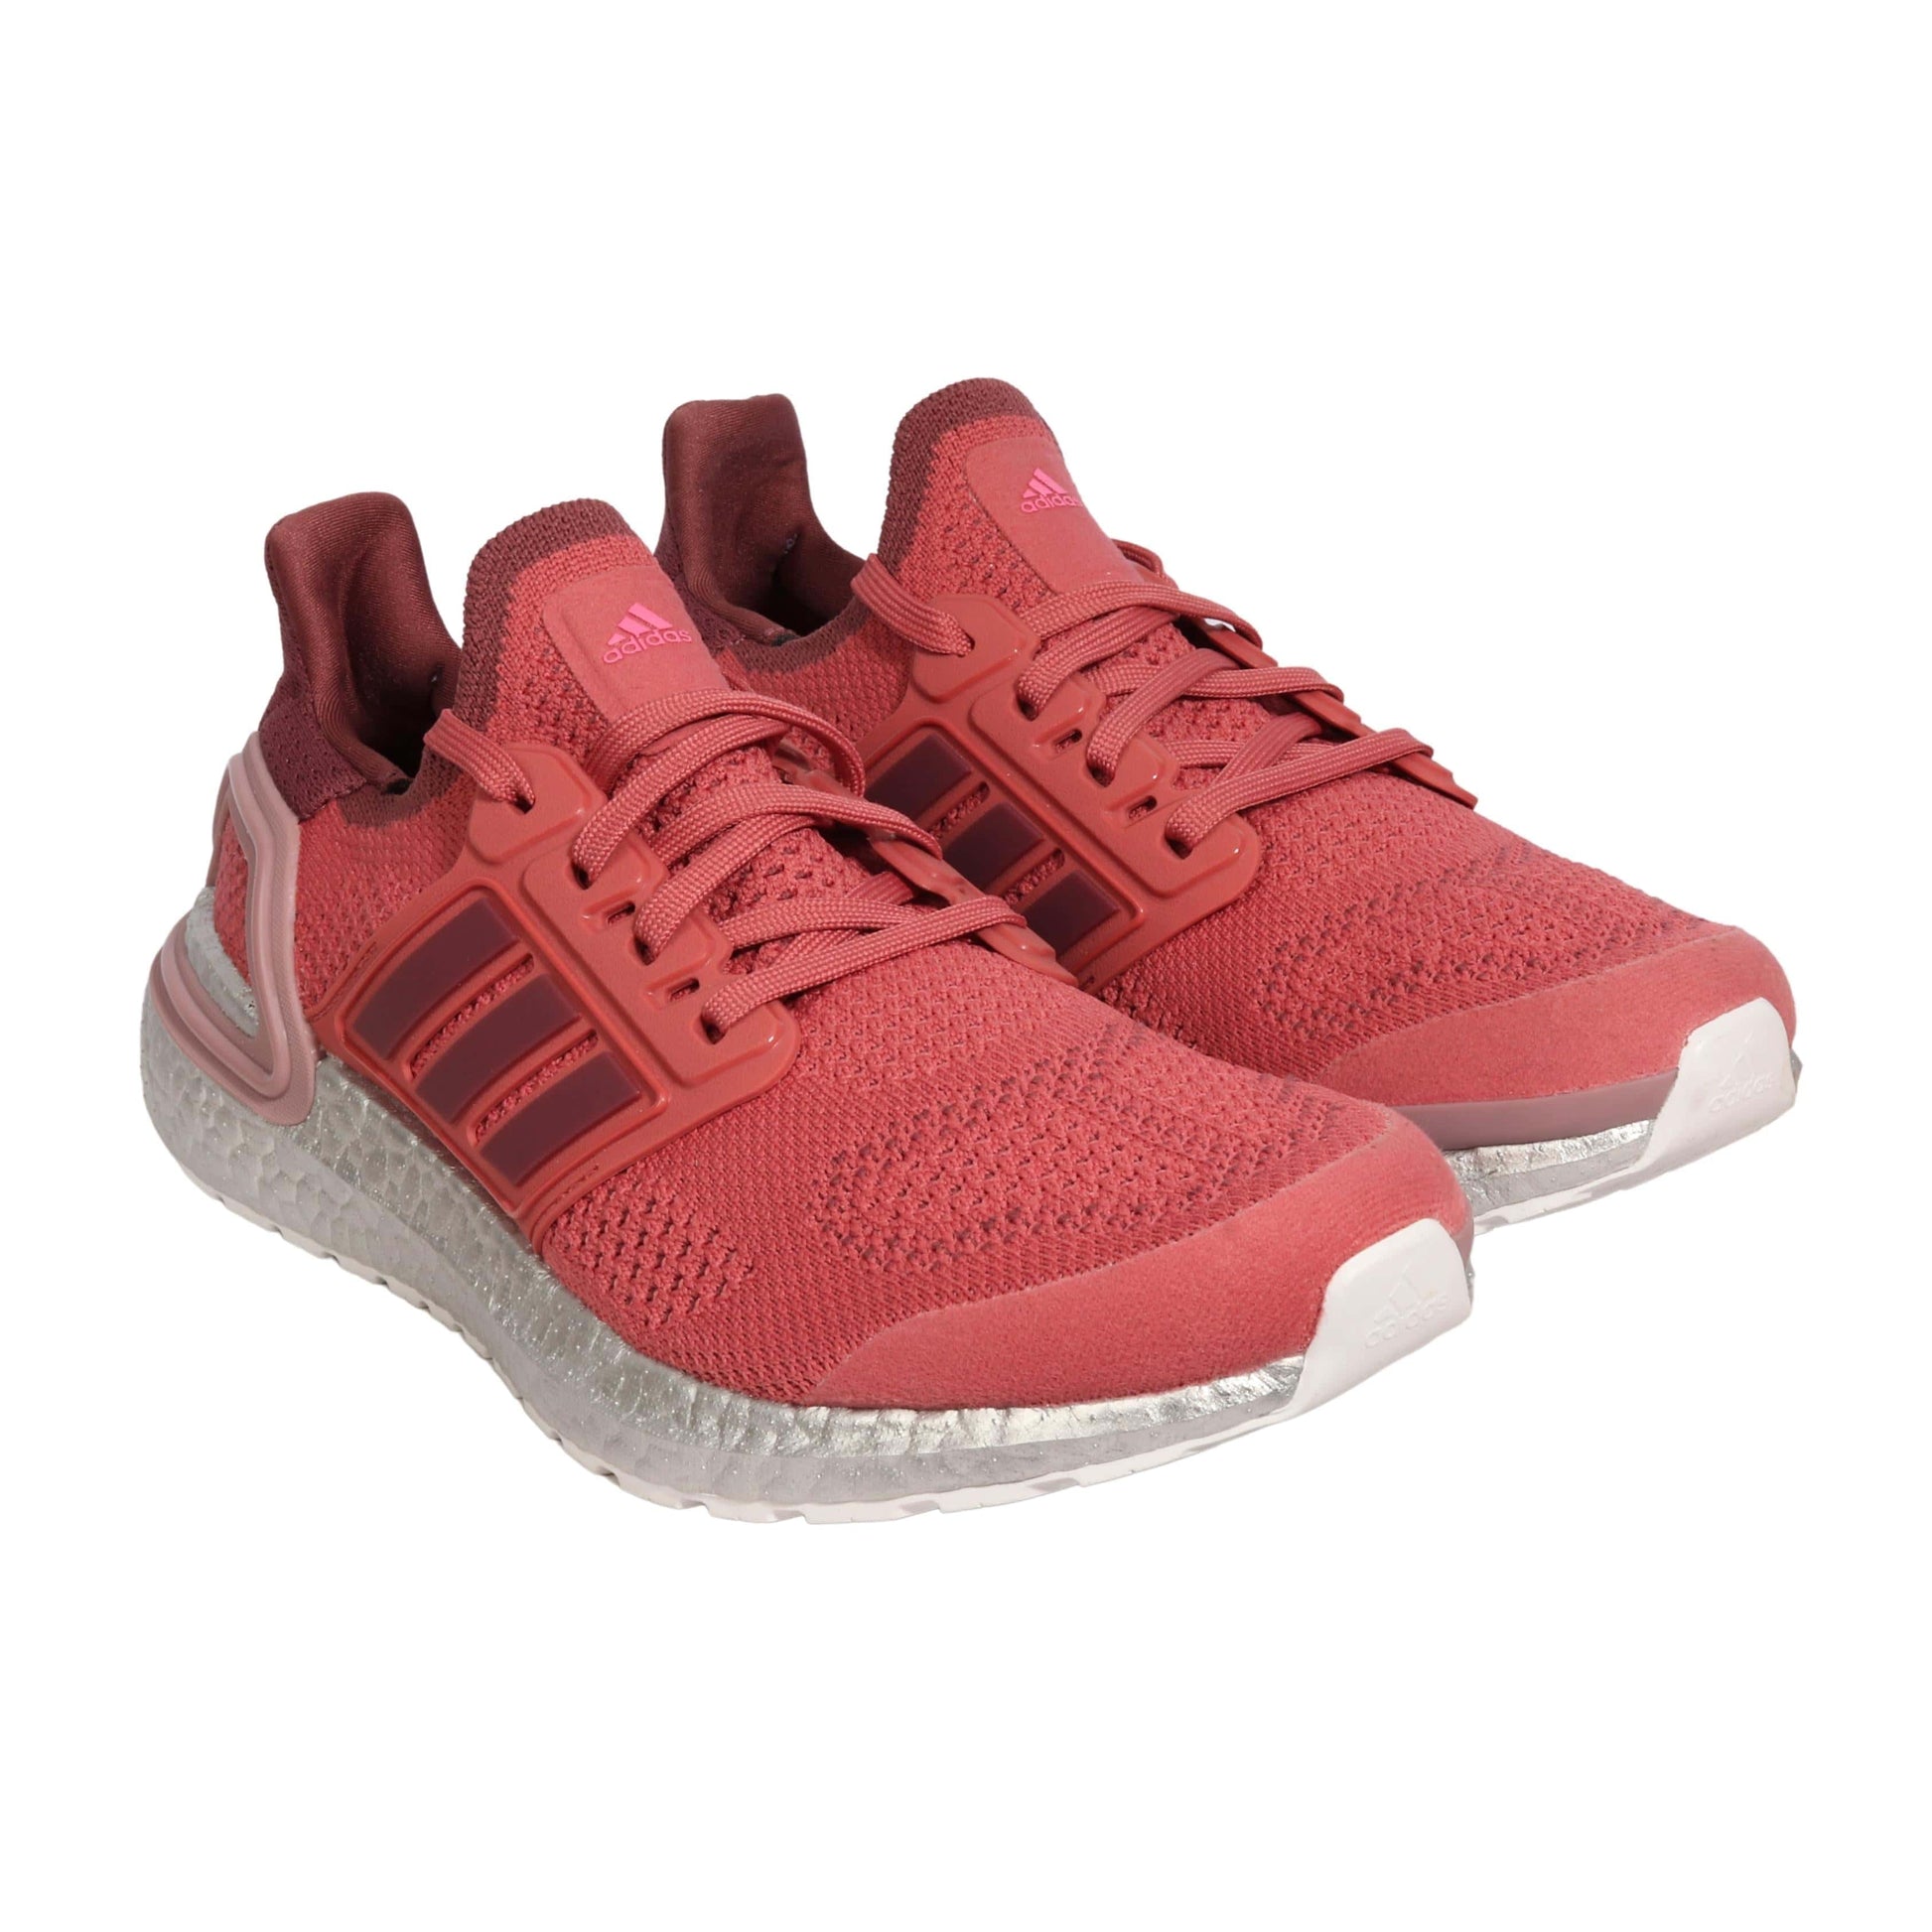 ADIDAS Athletic Shoes 40.5 / Pink ADIDAS - Ultra boost 19.5 DNA Sneakers